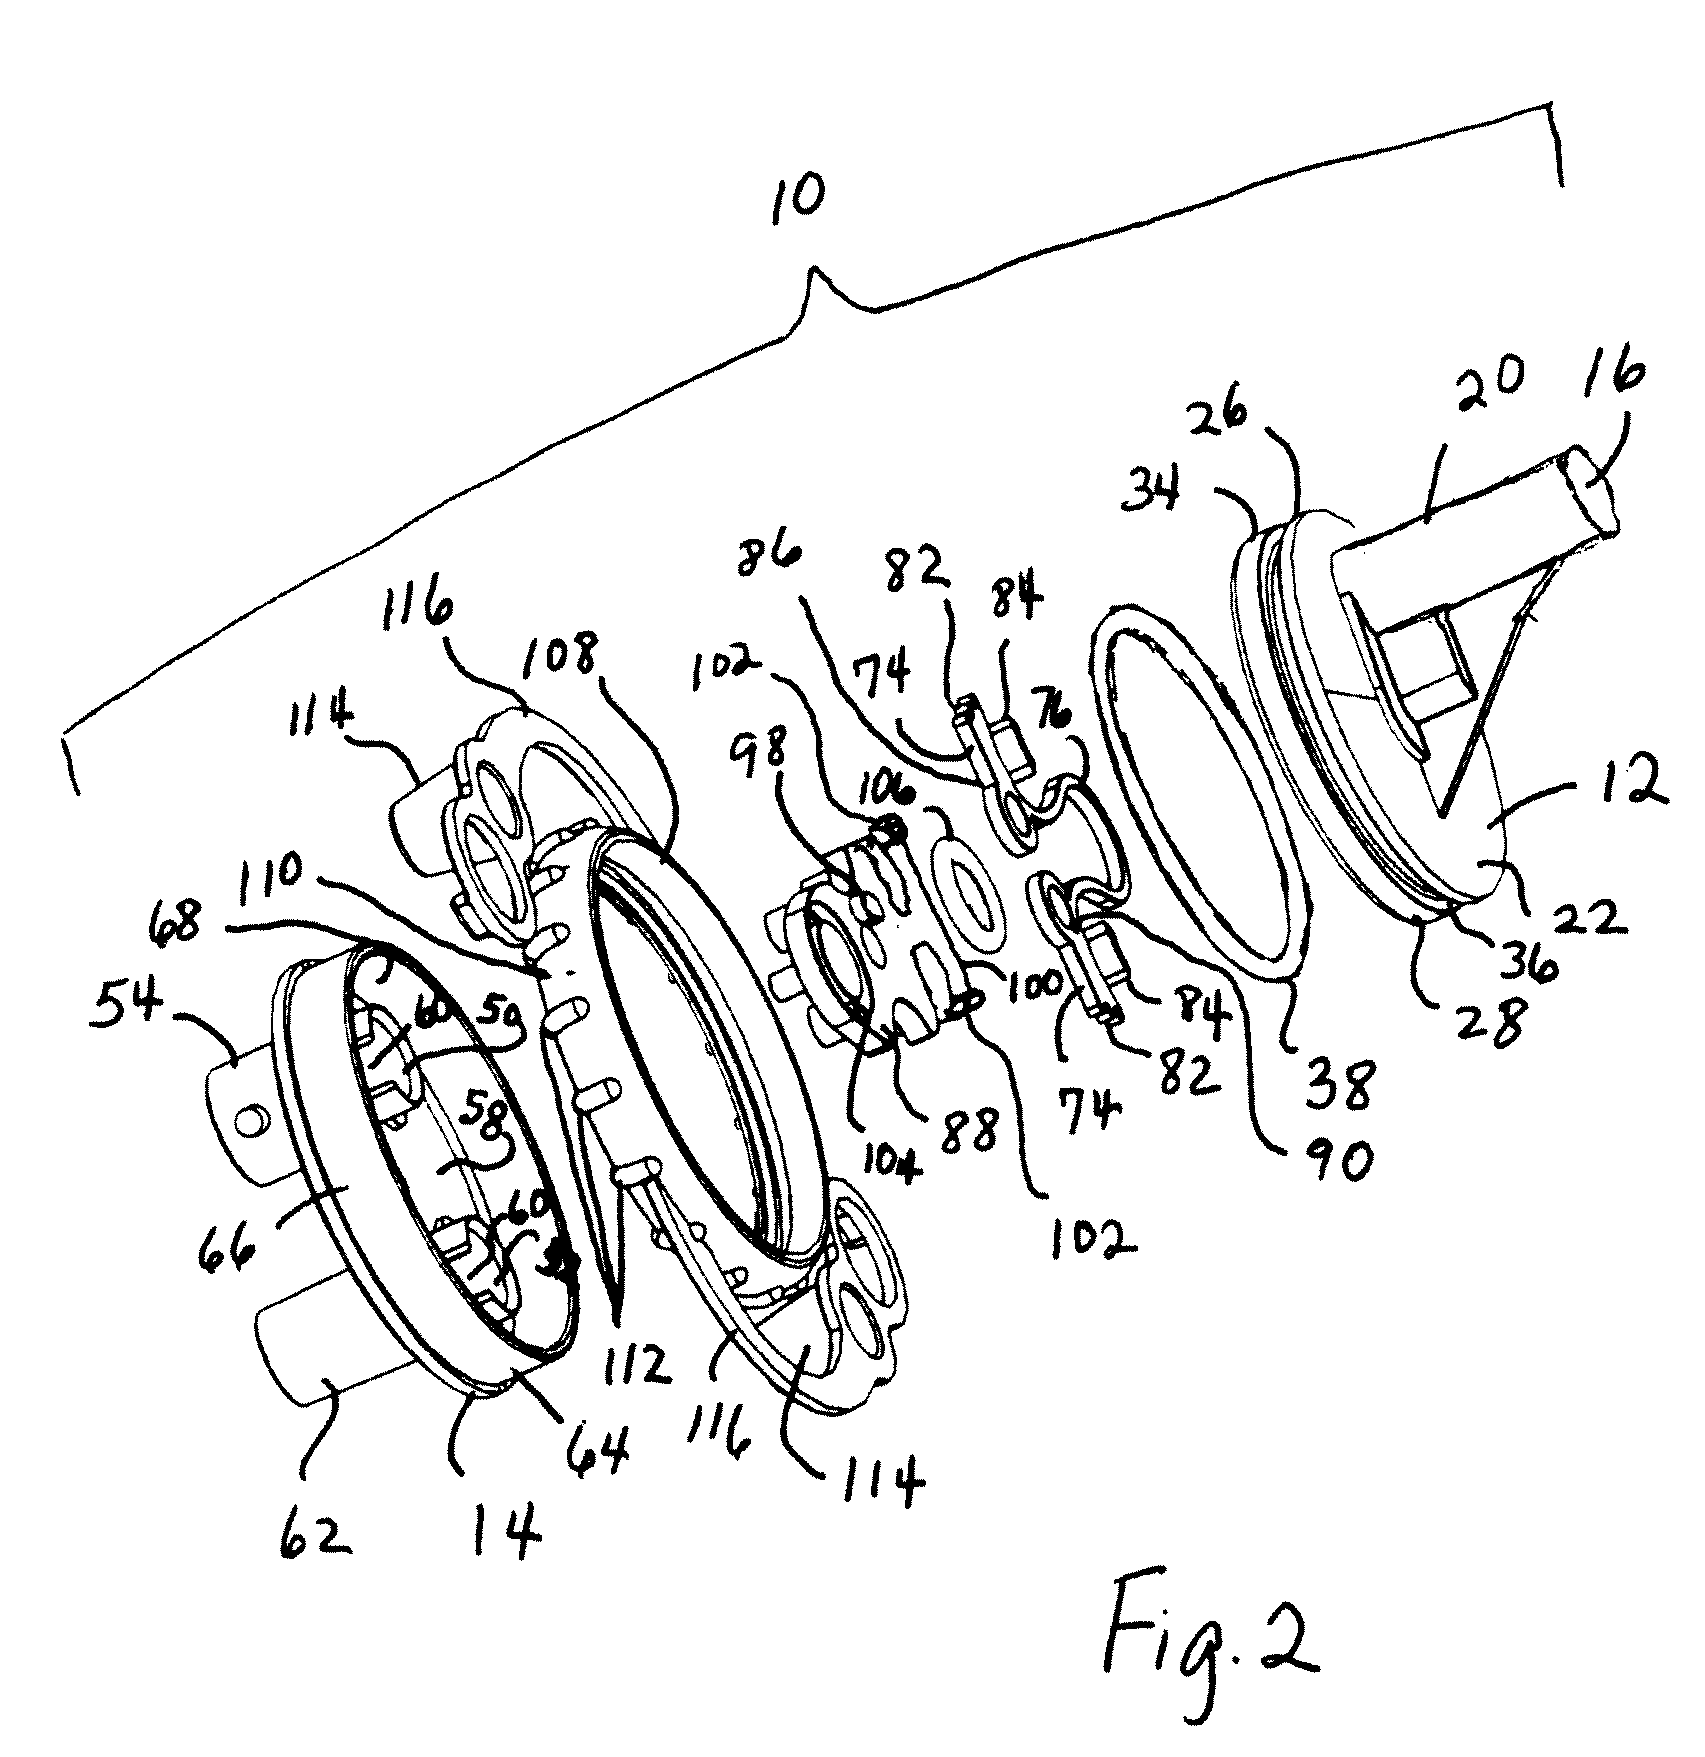 Respiratory Access Port Assembly With Passive Lock And Method Of Use